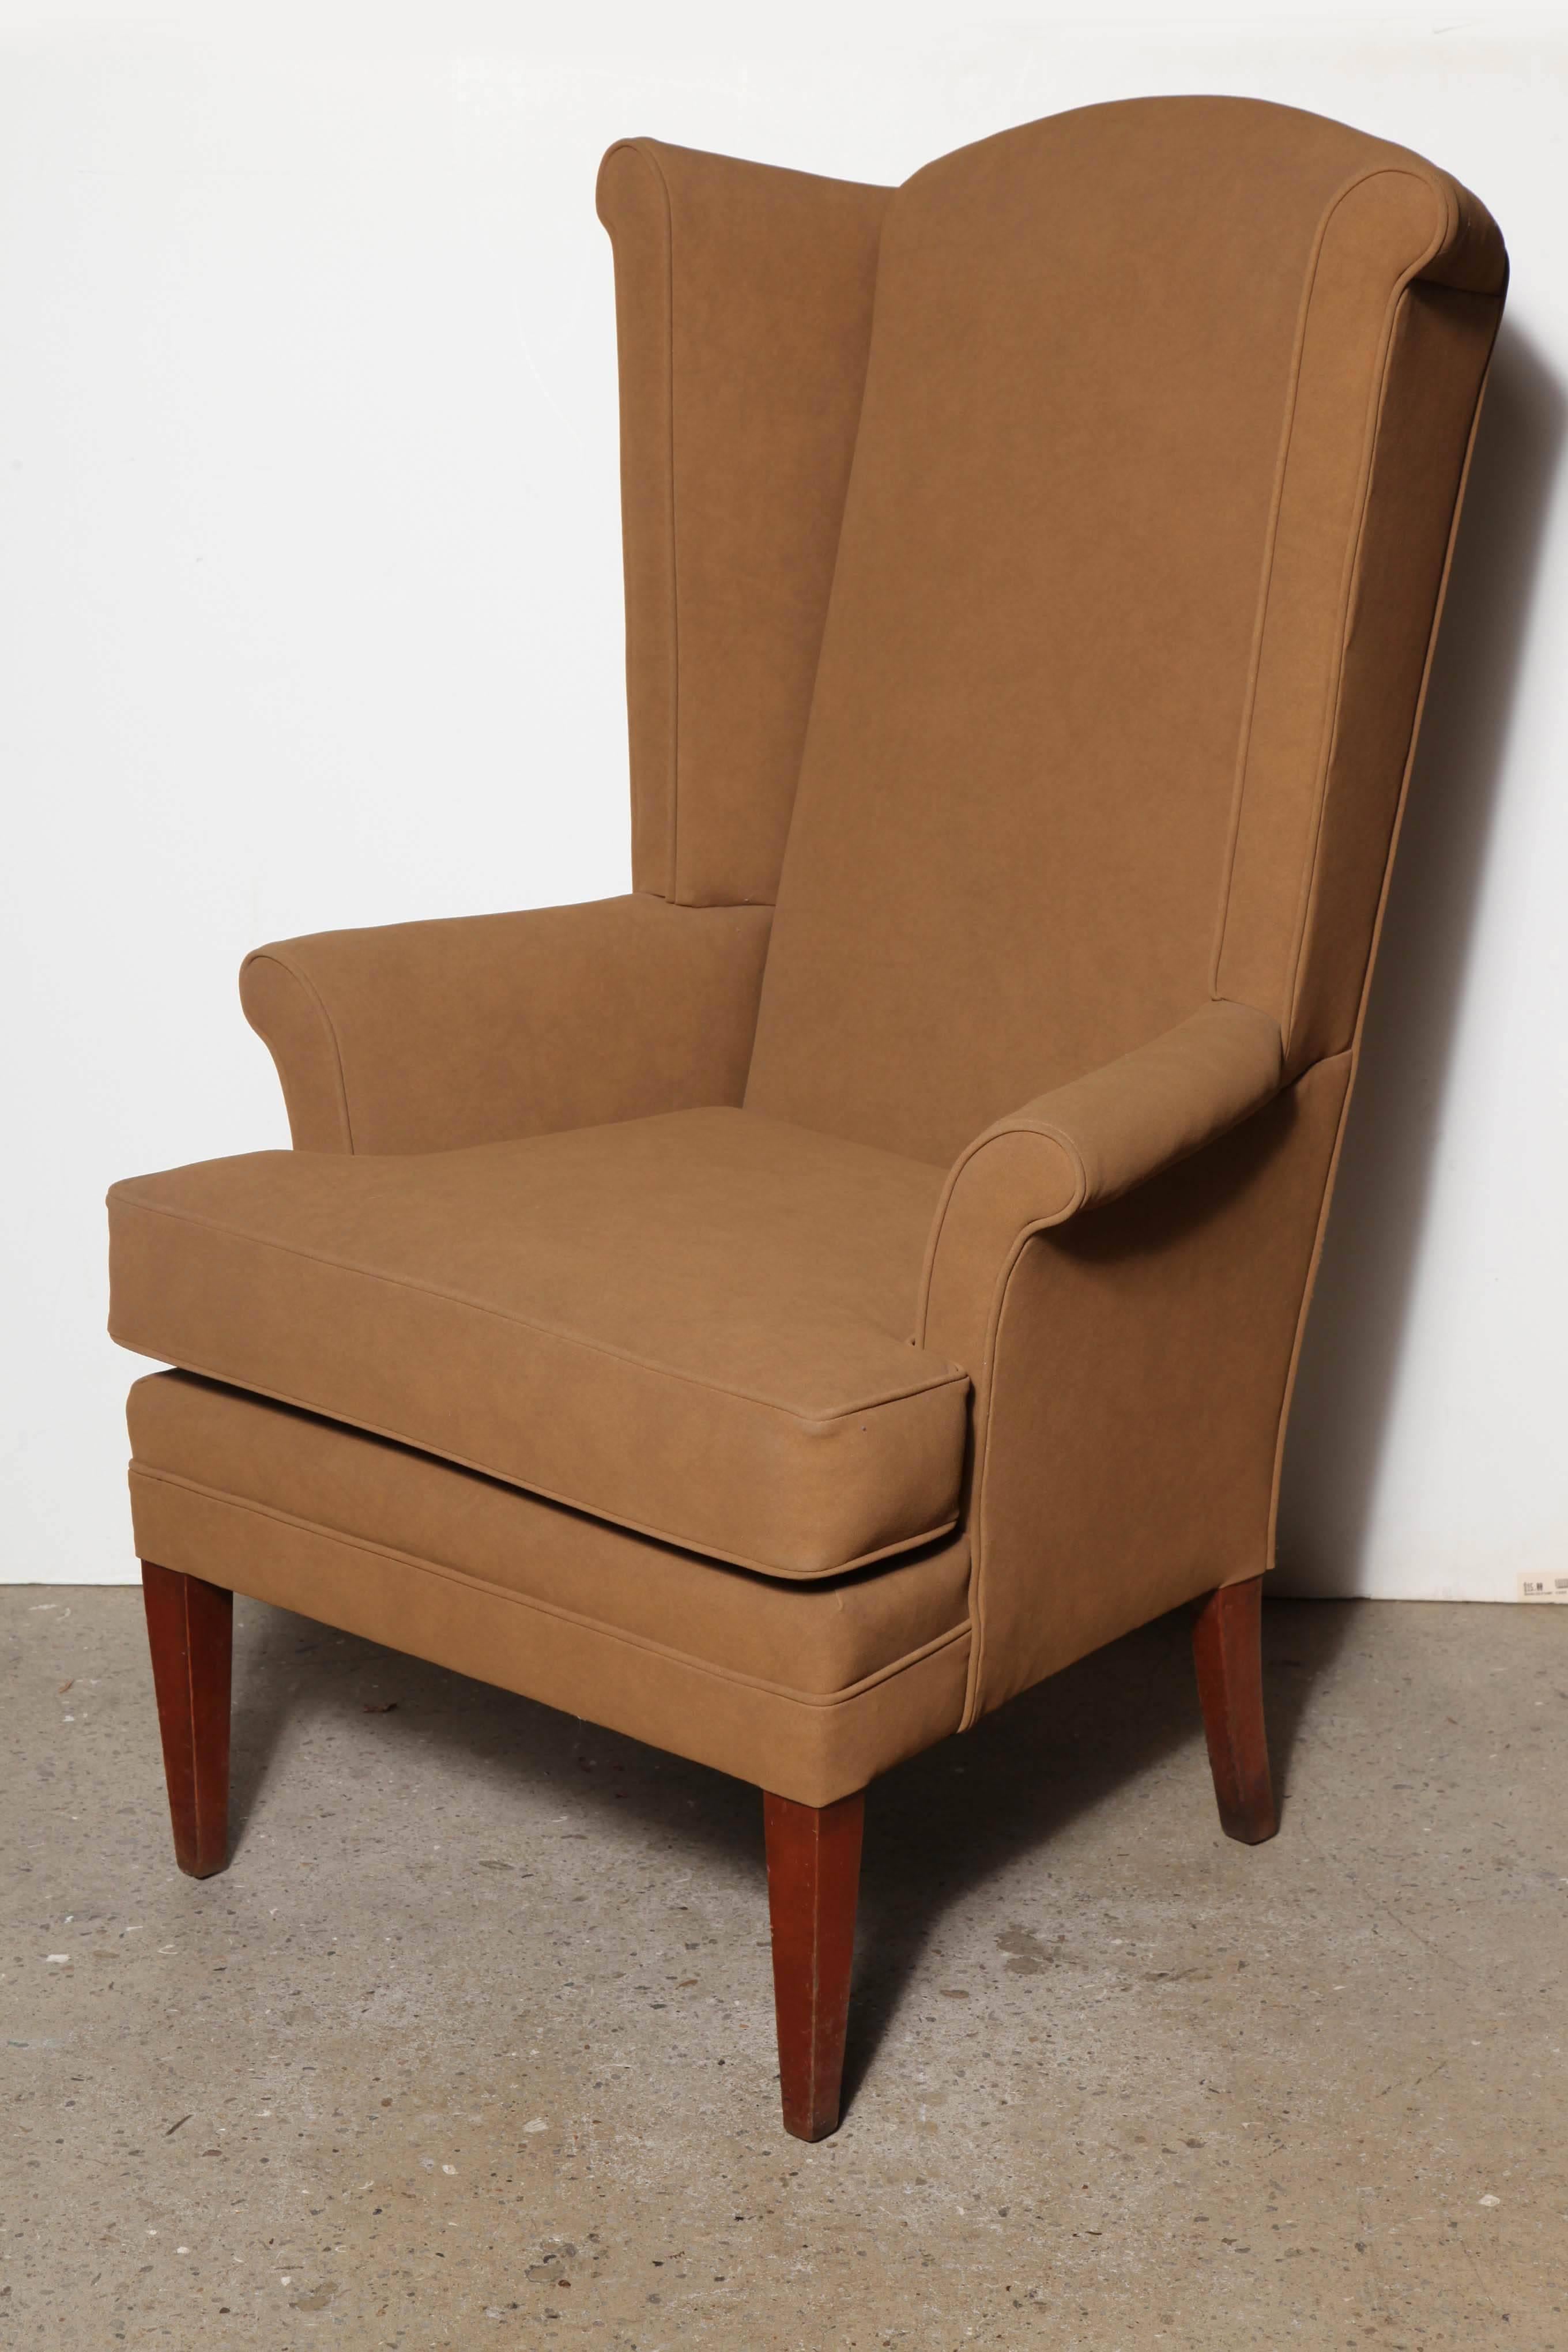 American Pair of Tall, Narrow Mid Century Camel Highback Wingback Chairs